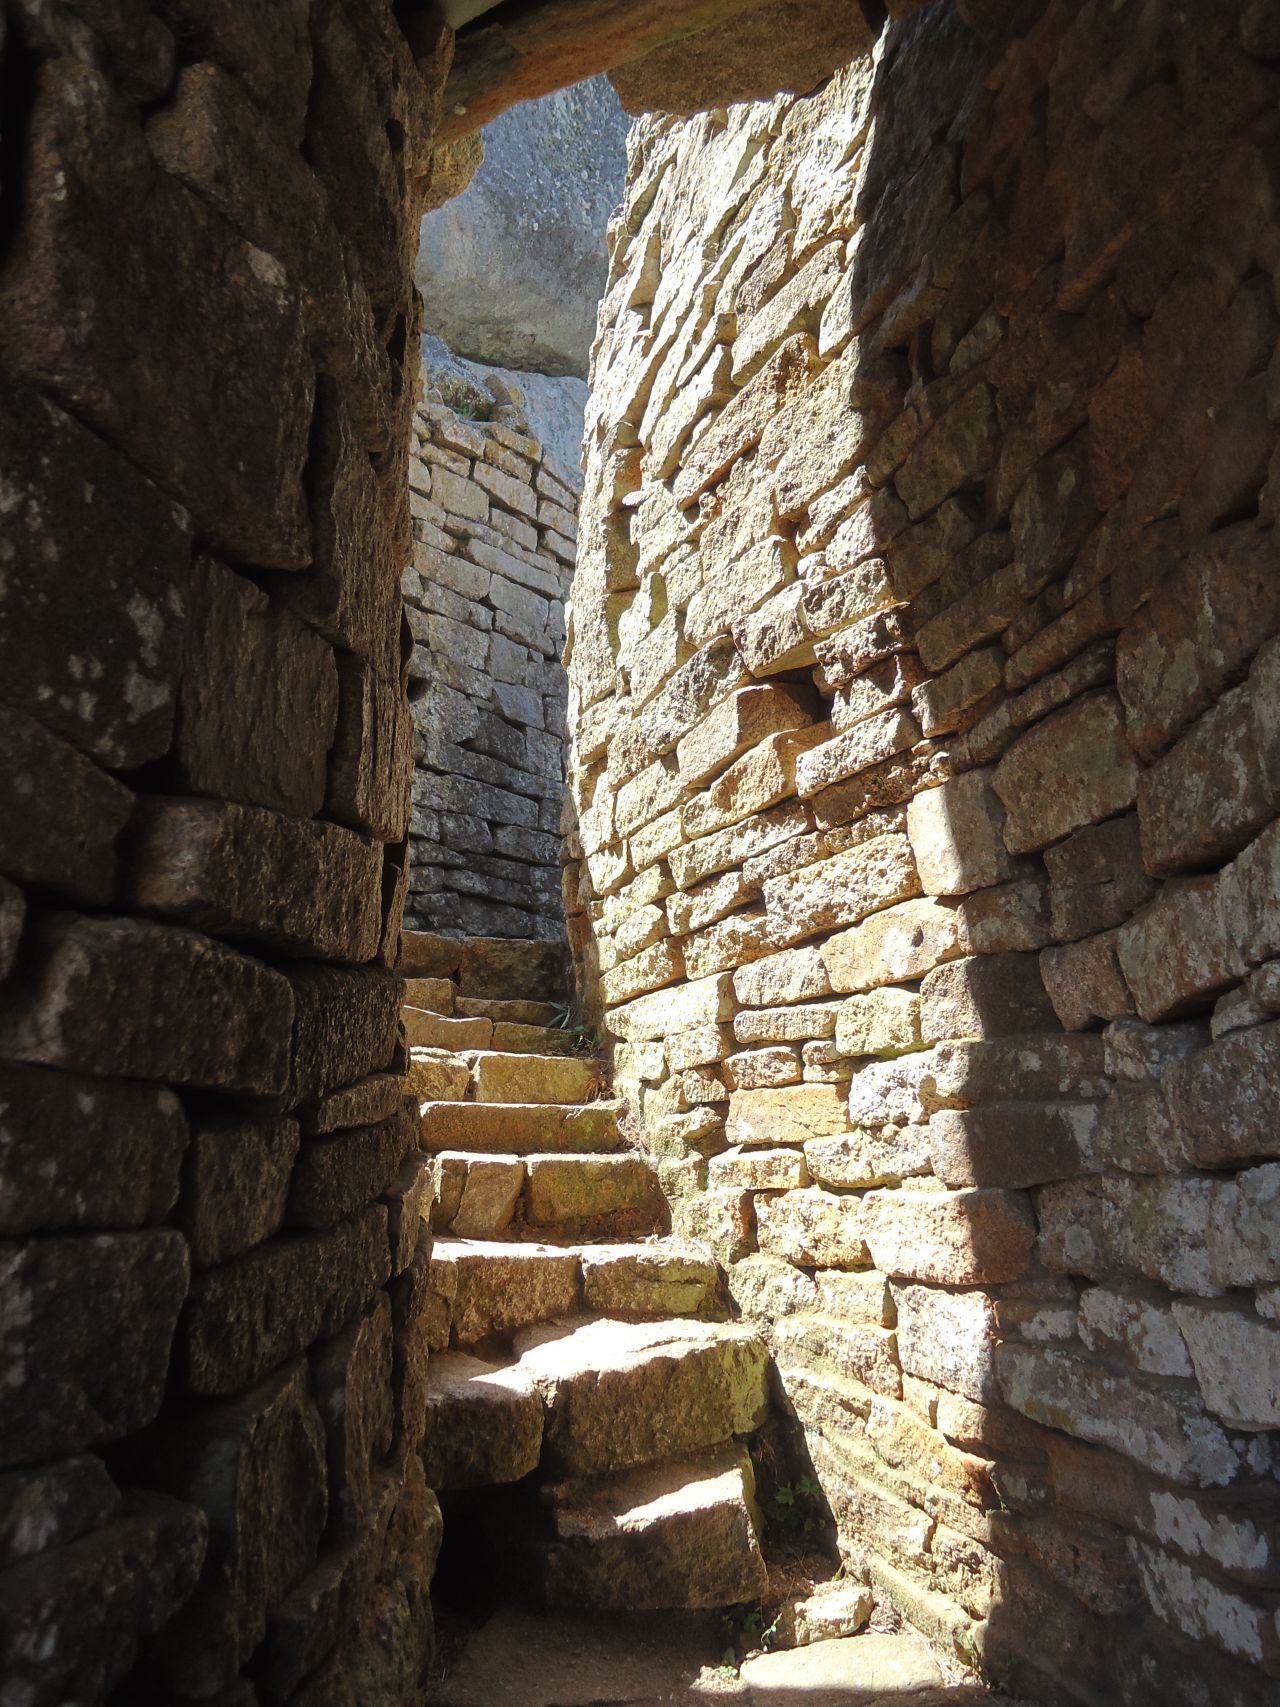 Walls extend between rocky outcrops and massive rocks, forming a maze of narrow passageways and enclosures.